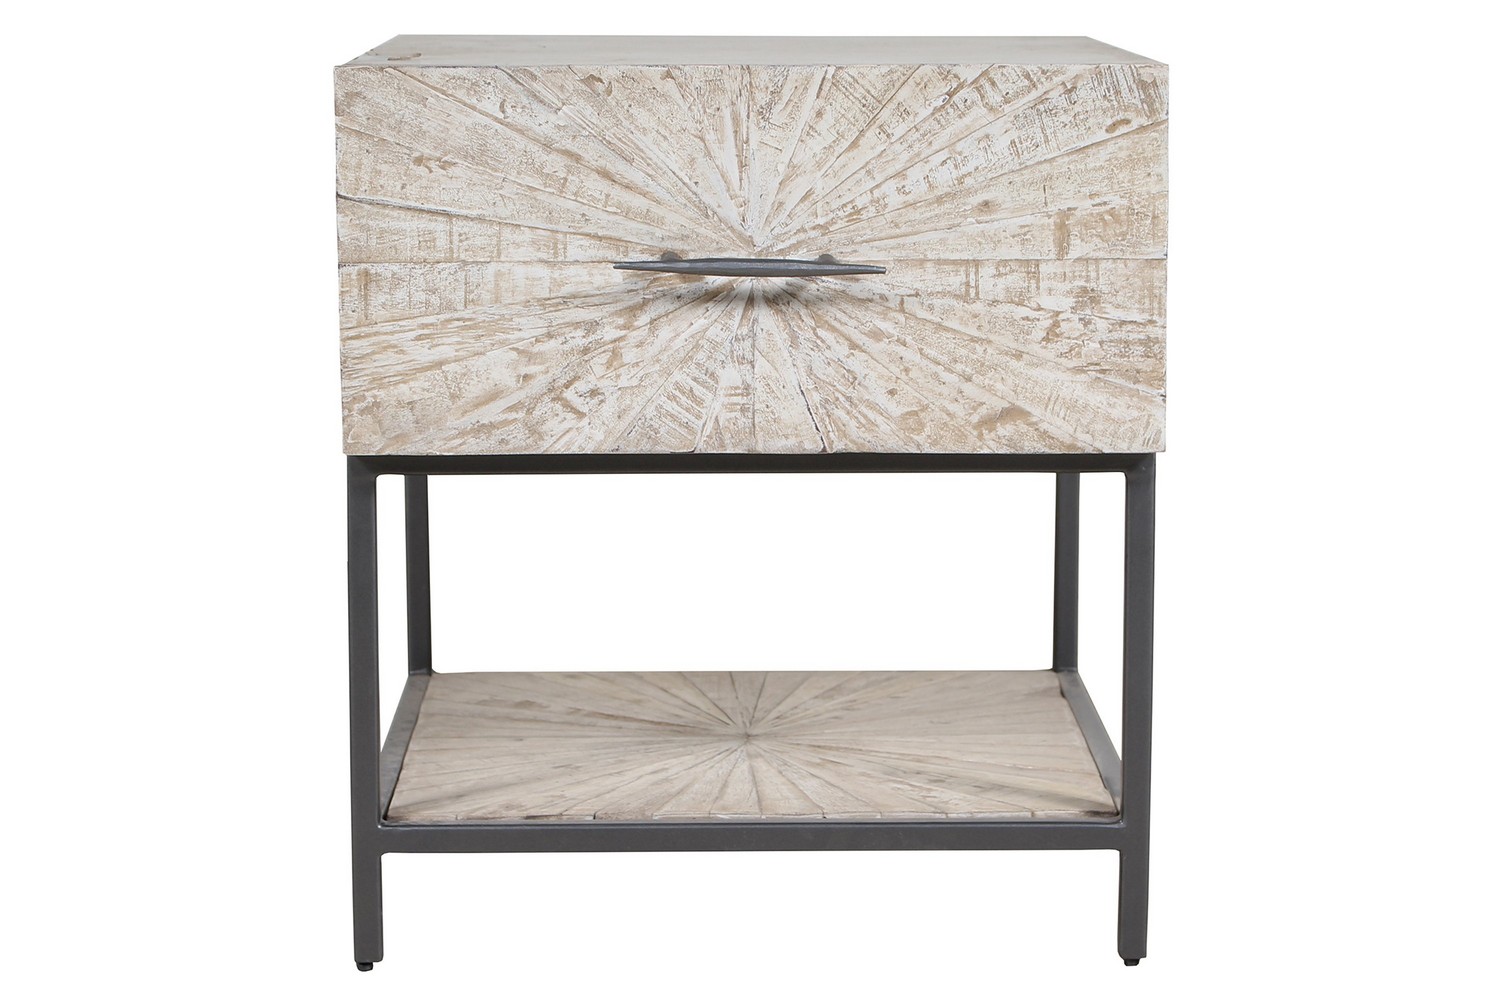 Parker House Crossings Monaco End table - Weathered Blanc